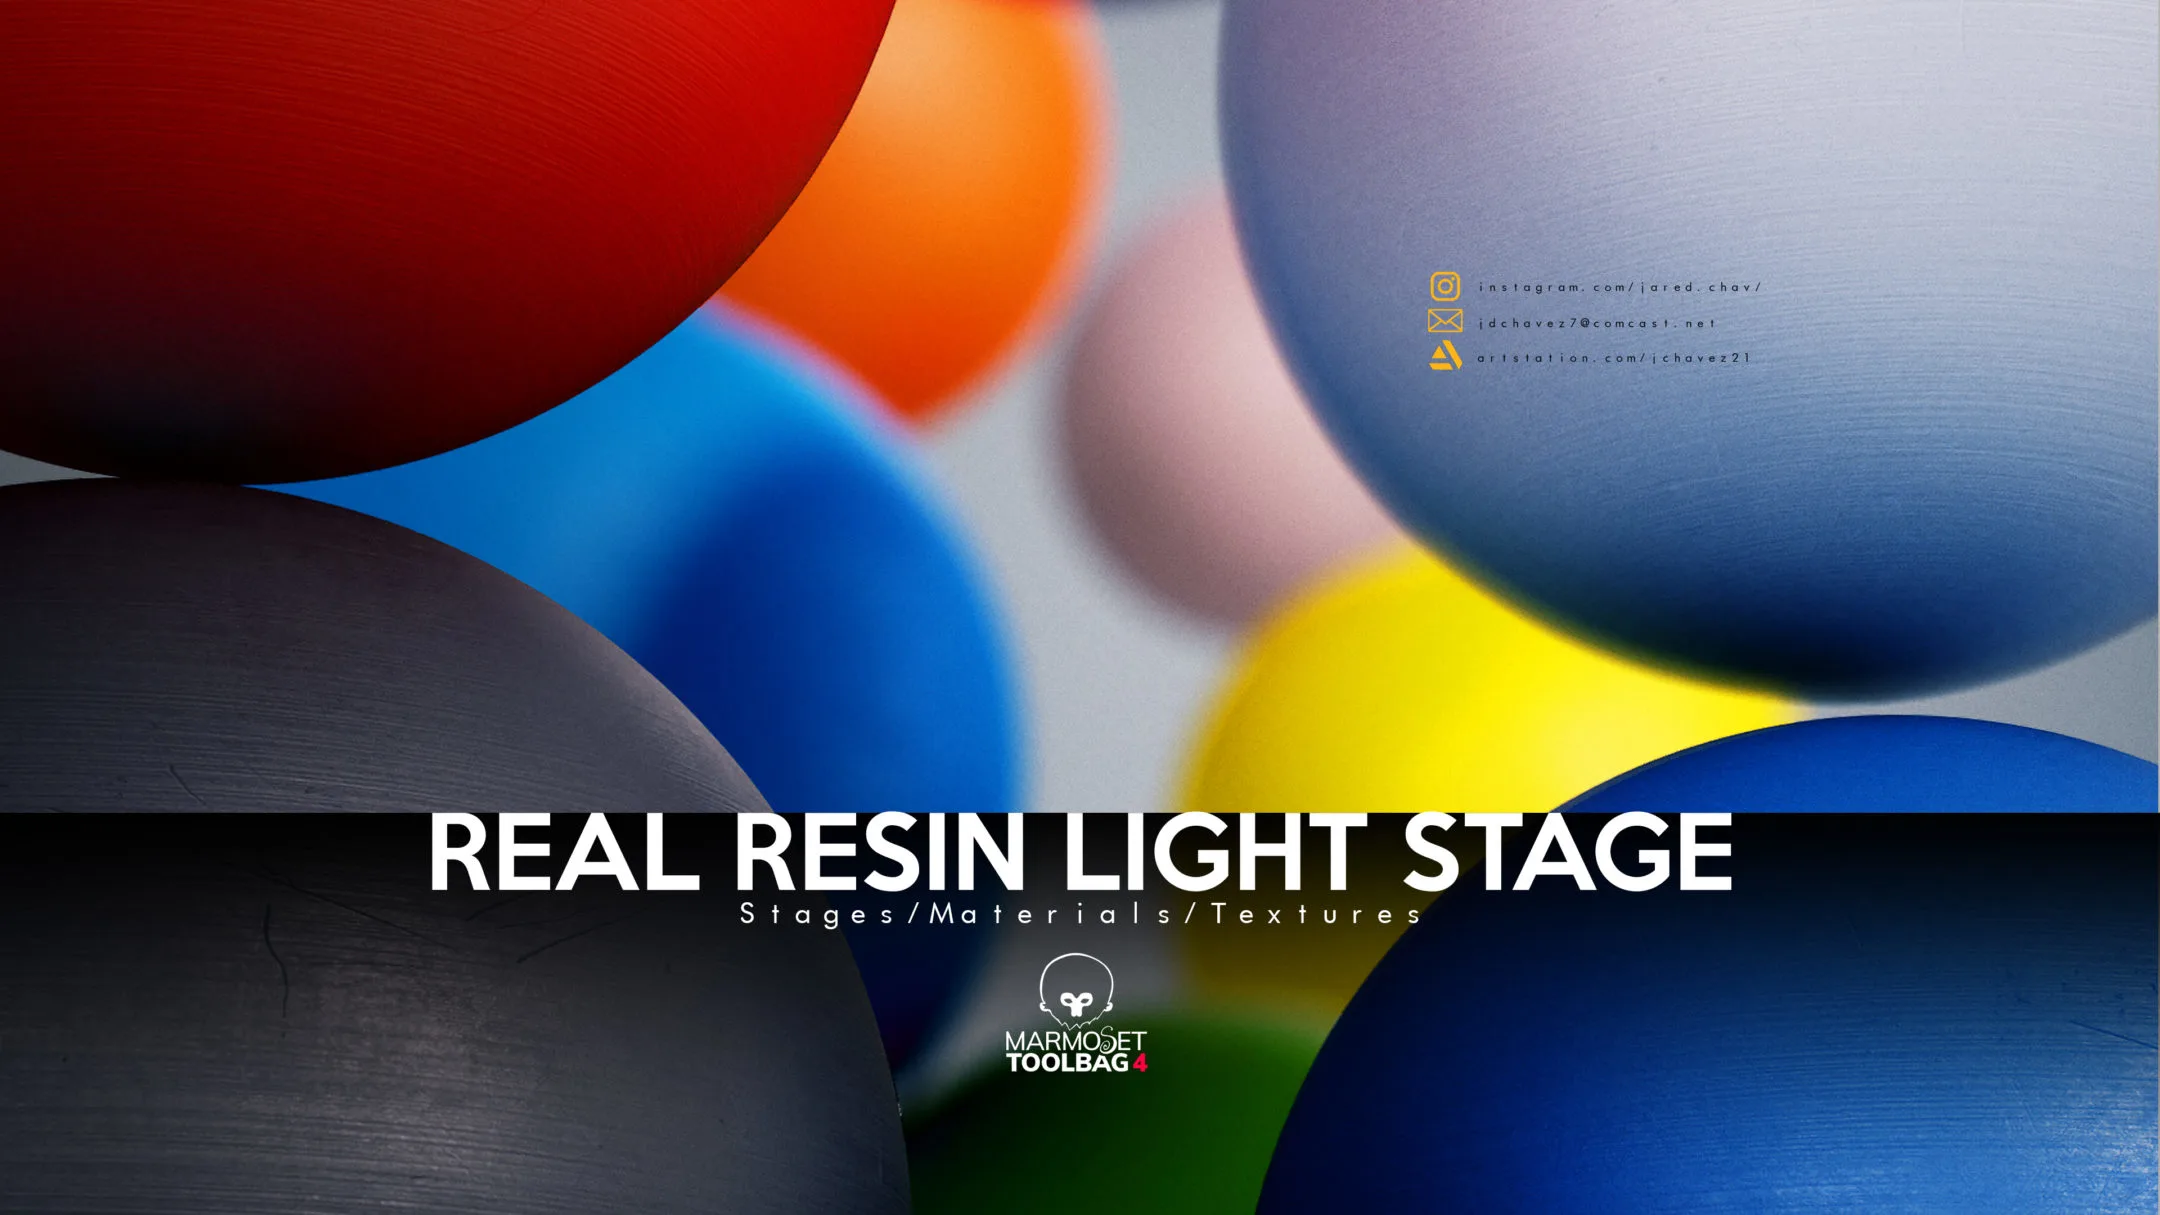 Real Resin Light Stage: Marmoset 4